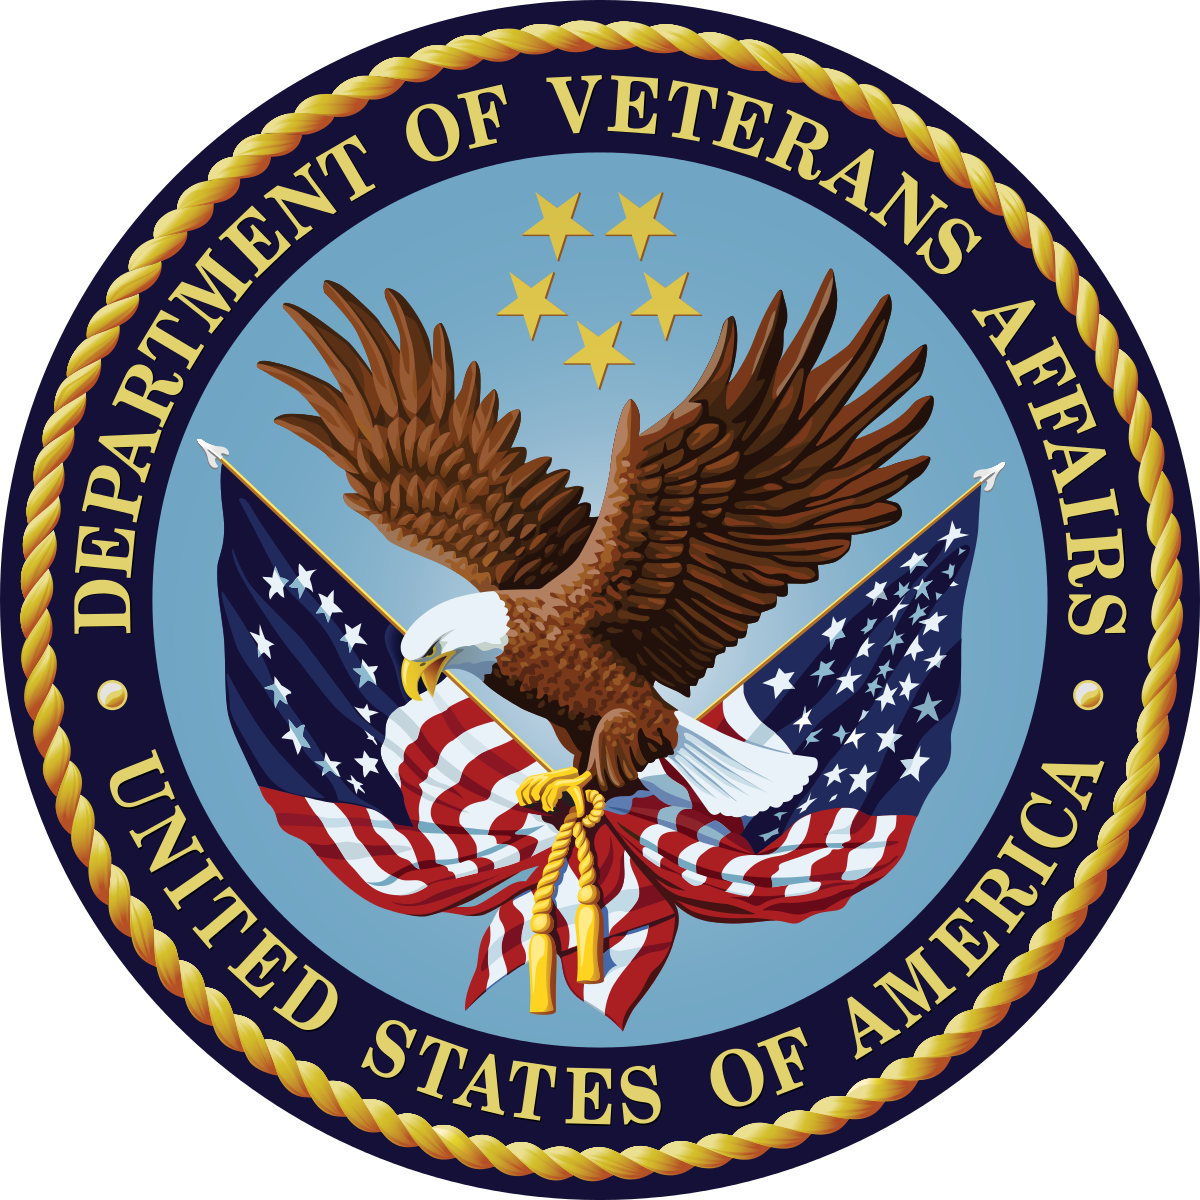 1200px-Seal_of_the_U.S._Department_of_Veterans_Affairs.svg.png